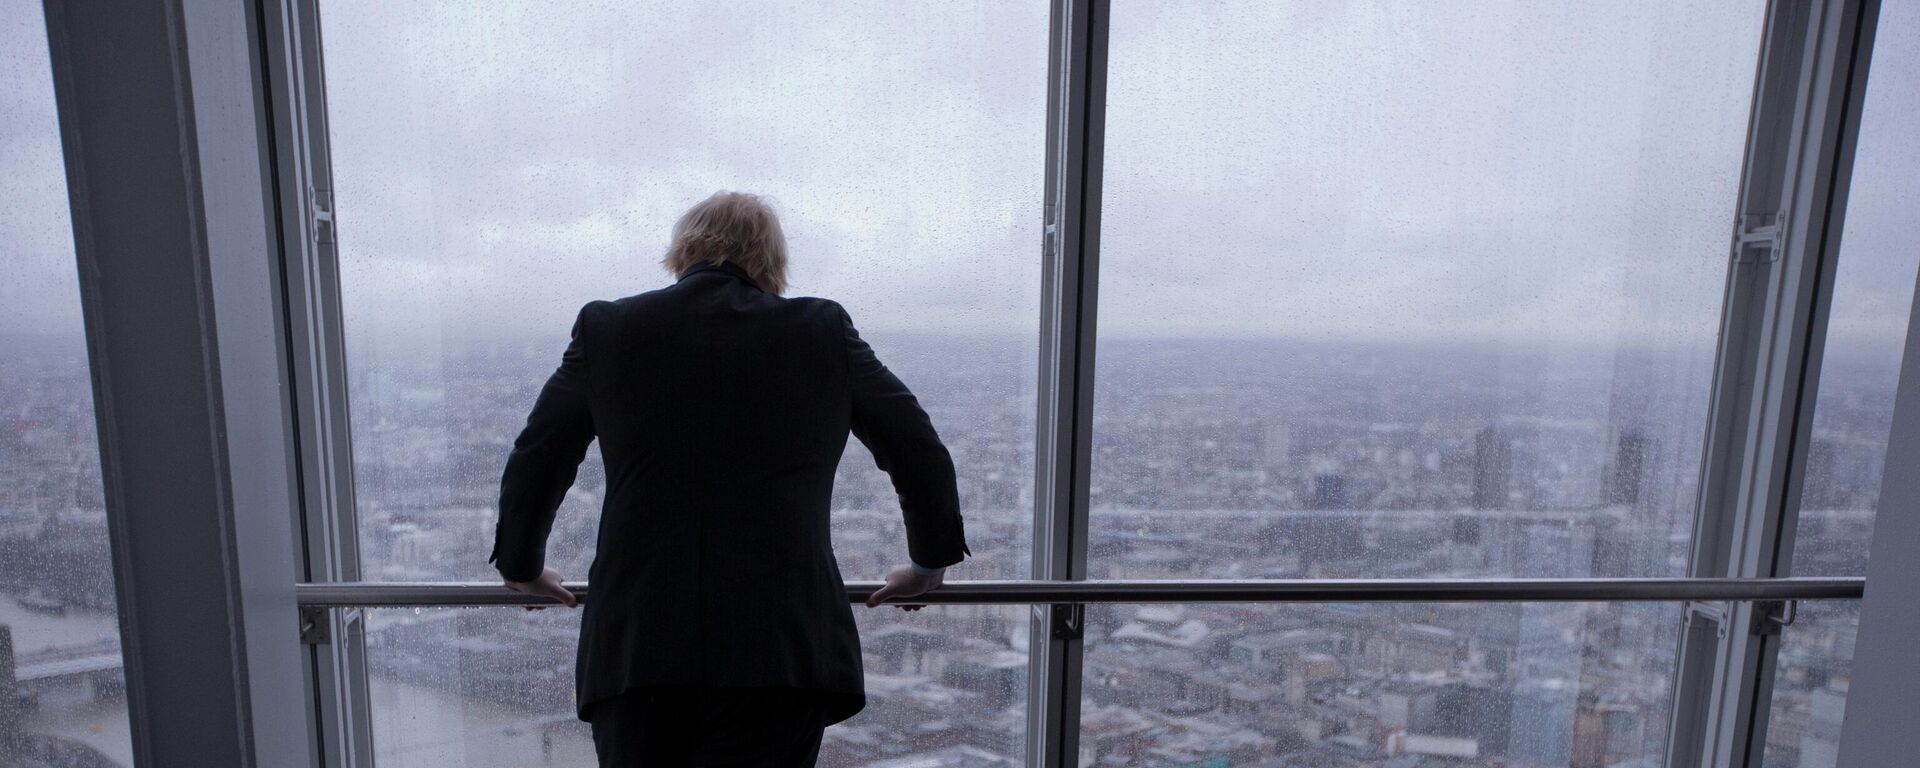  Boris Johnson poses for photographers by looking out at the sights after officially opening The View viewing platform at the Shard skyscraper in London, Friday, Feb. 1, 2013 - Sputnik International, 1920, 08.07.2022